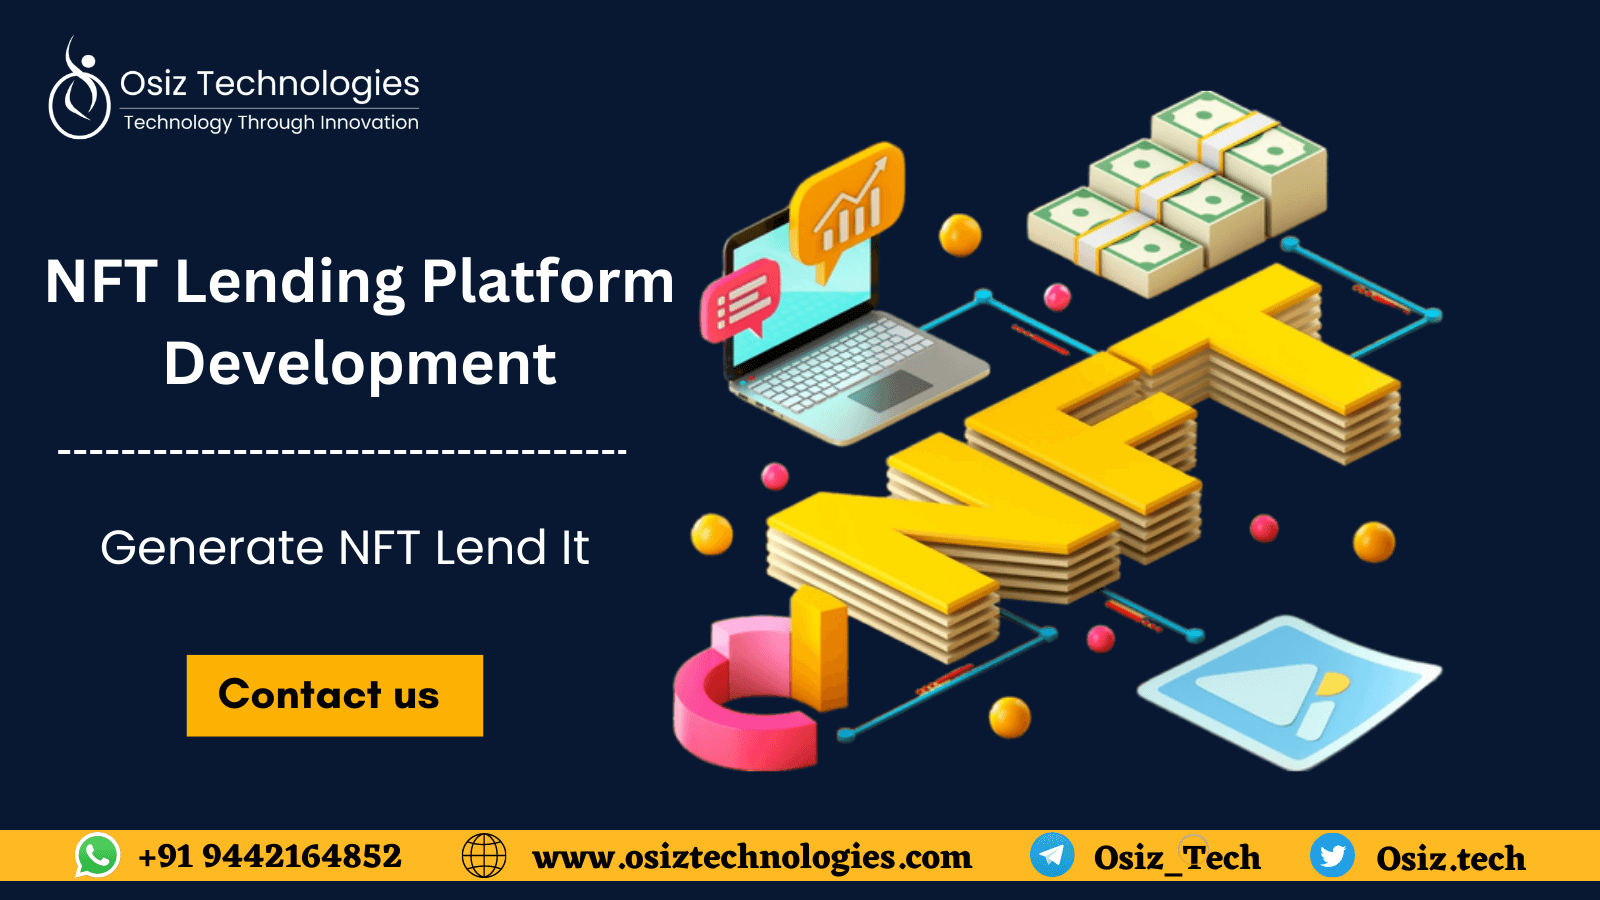 Materialize your dream of building a robust NFT lending platform with the best NFT lending platform development services 